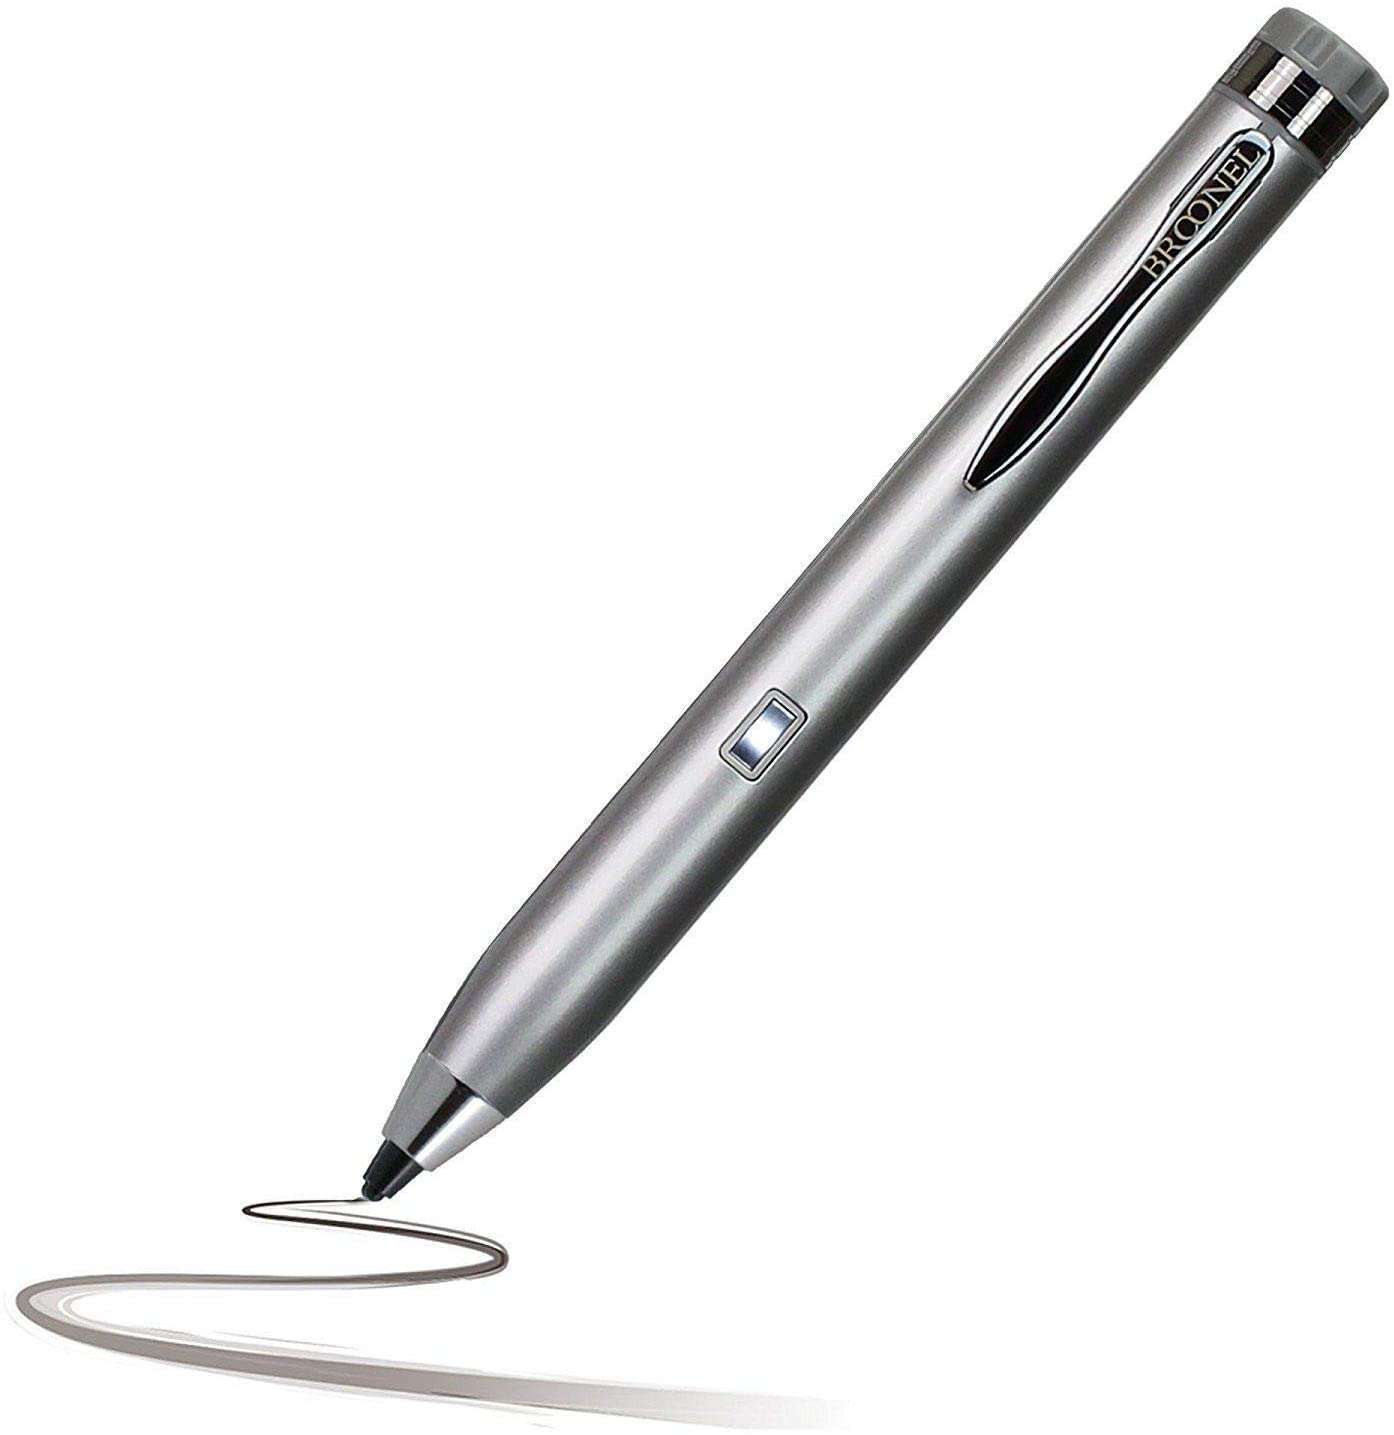 Broonel Silver Mini stylus for the Samsung XE500C13K03US 3 11.6